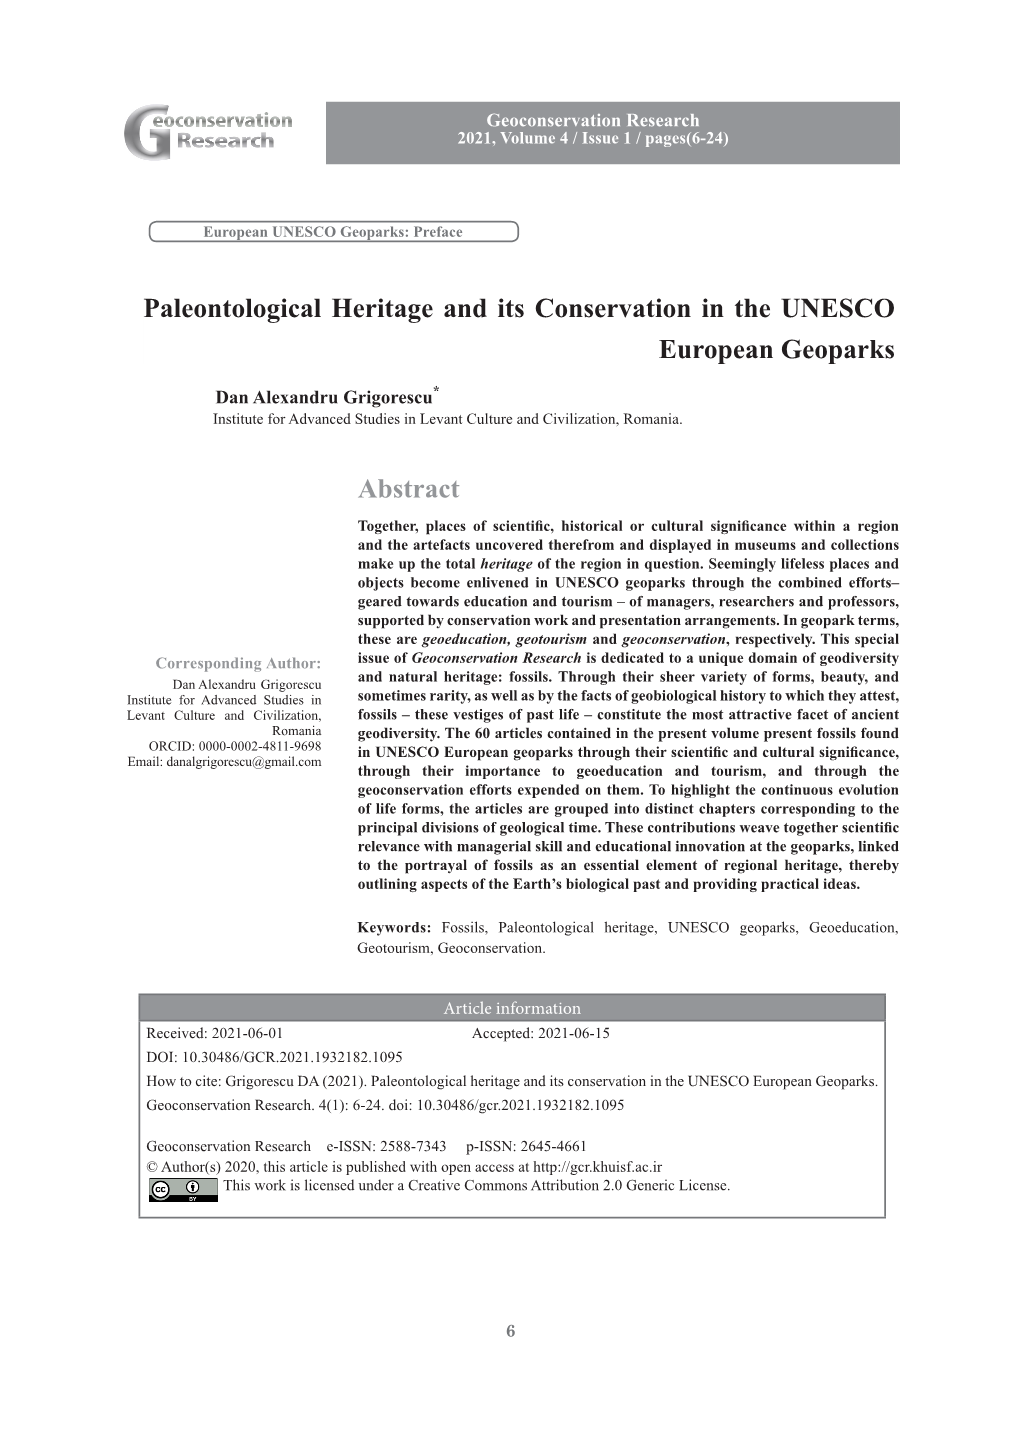 Abstract Paleontological Heritage and Its Conservation in the UNESCO